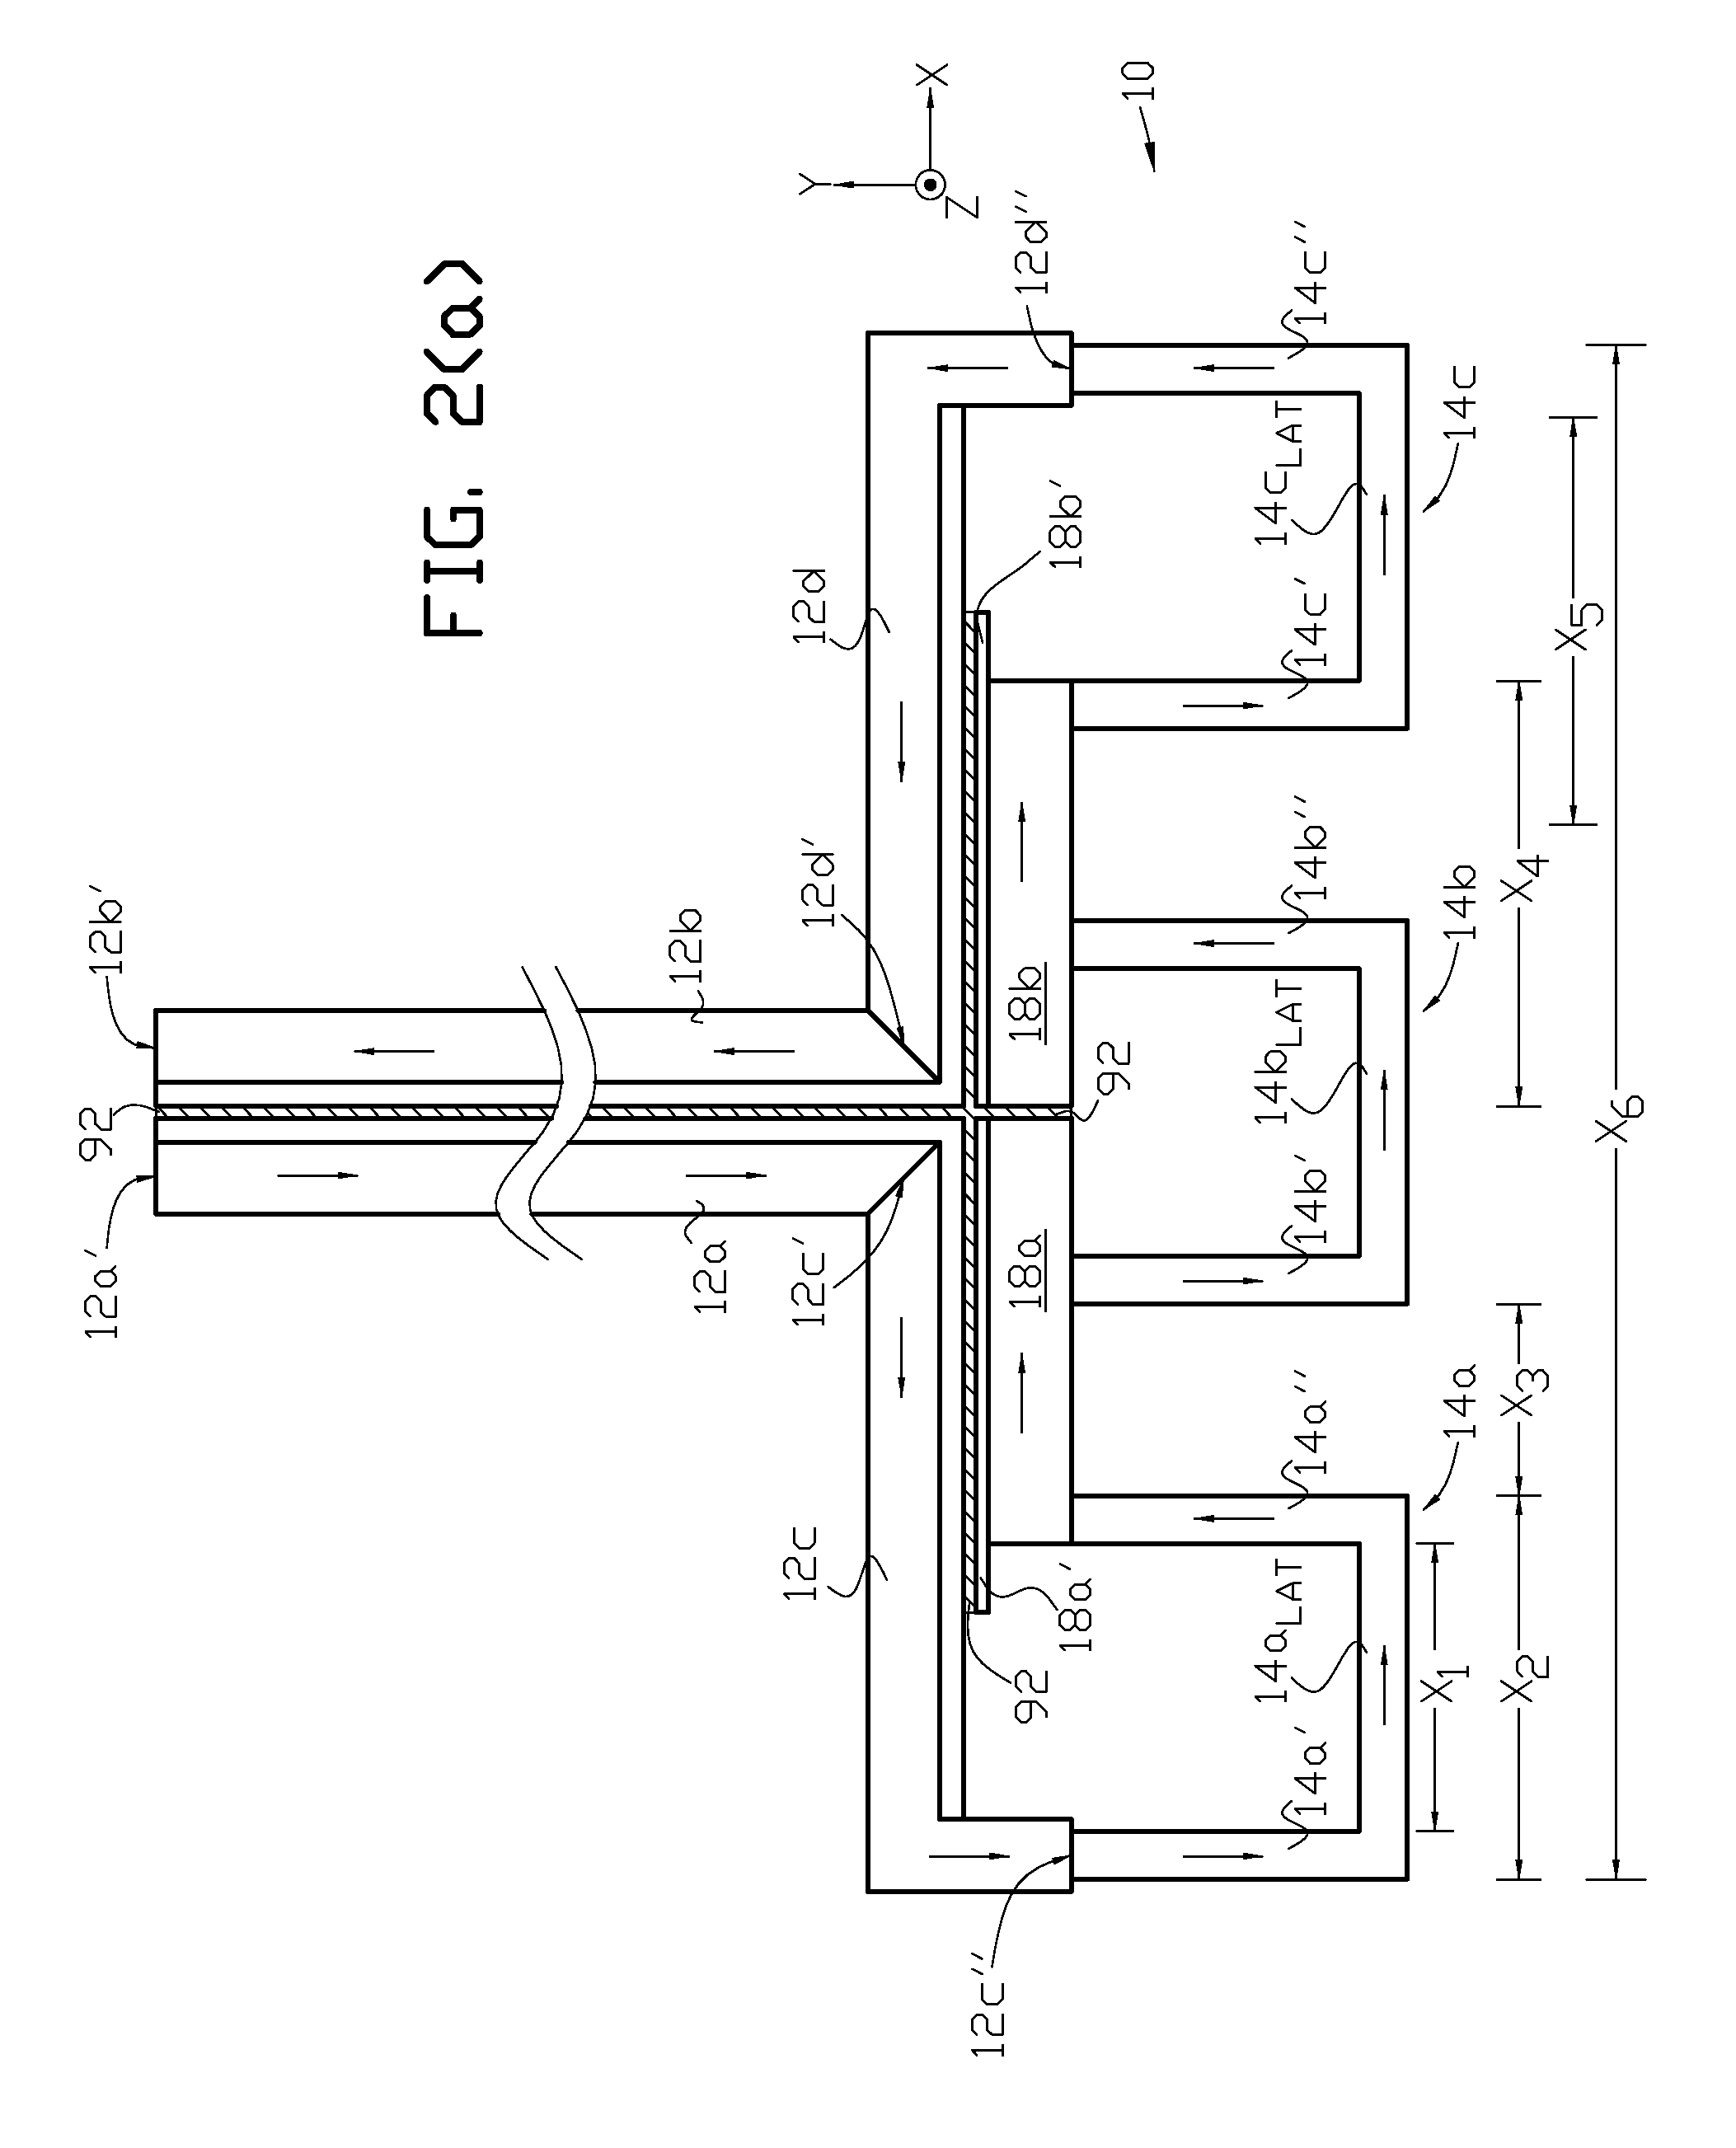 Electric Induction Heat Treatment of Electrically Conductive Thin Strip Material